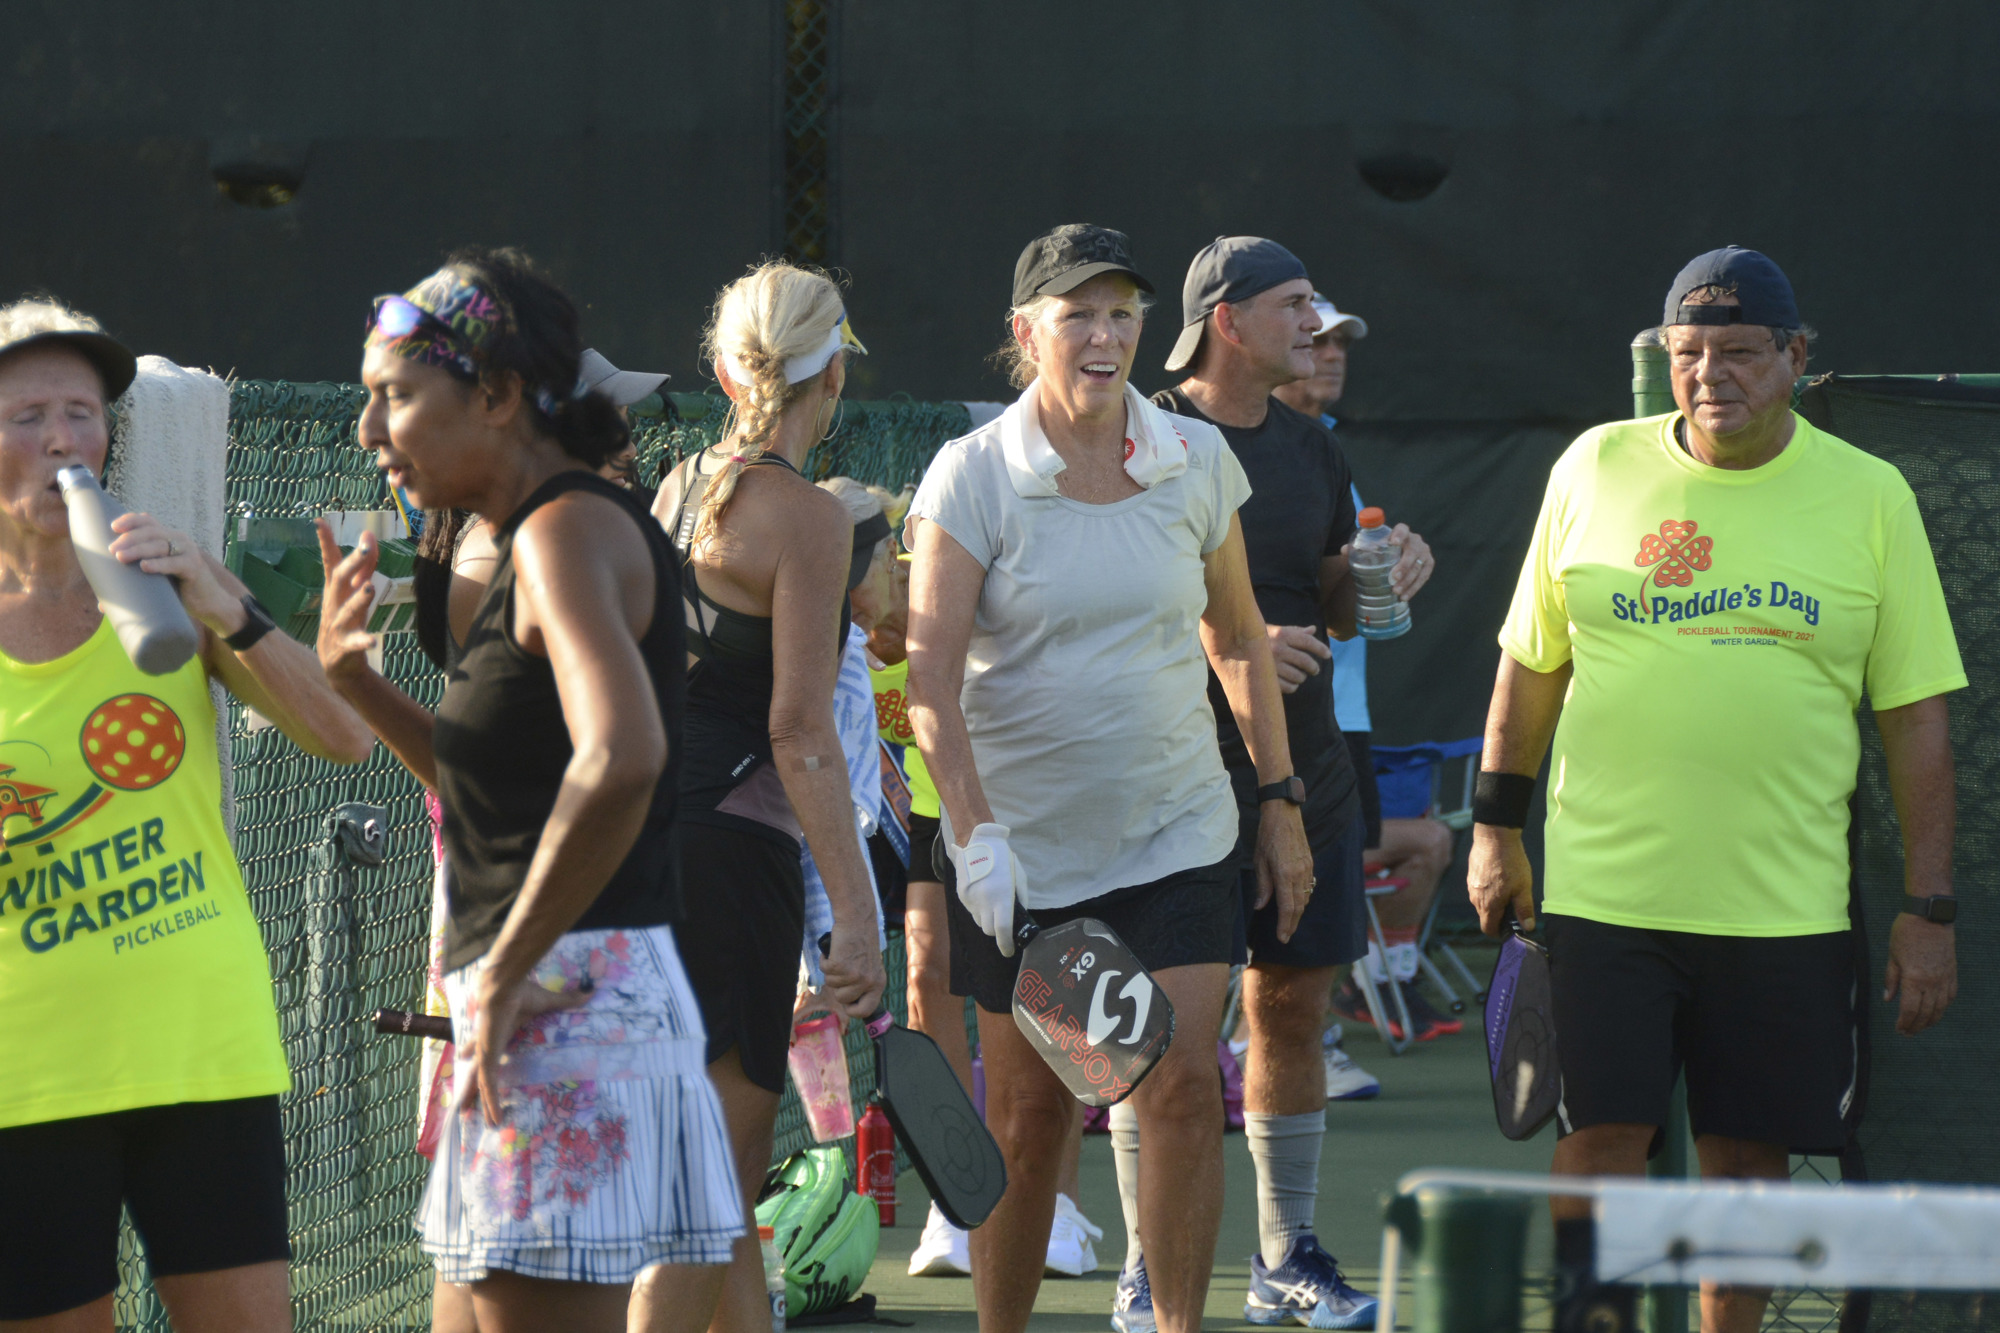 Socializing is a big part of pickleball, and one reason why so many people enjoy it.